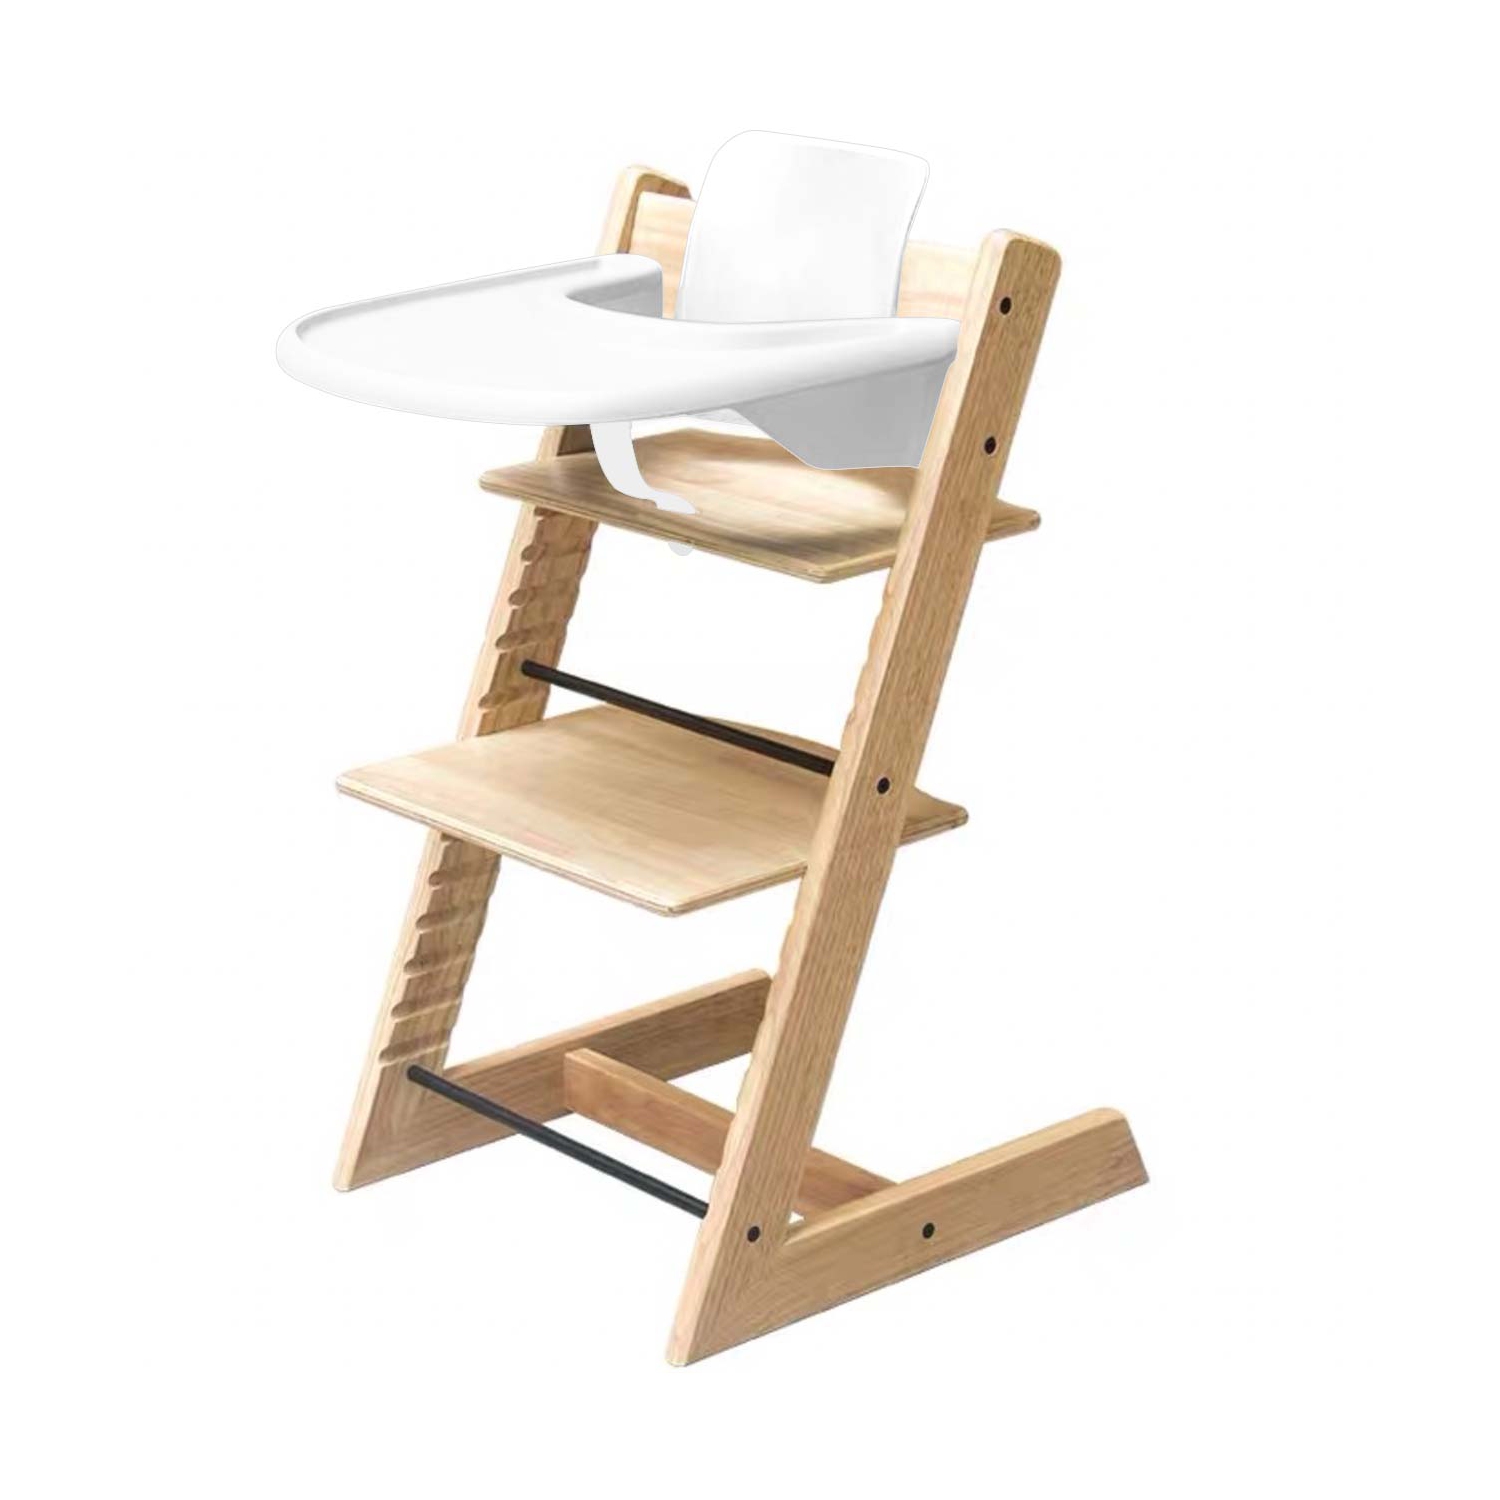 MotionGrey Blessy Wooden High Chair with Tray. The Perfect Adjustable Baby Highchair Solution for Your Babies and Toddlers or as a Dining Chair. (6 Months up to 250 Lb) - Wood